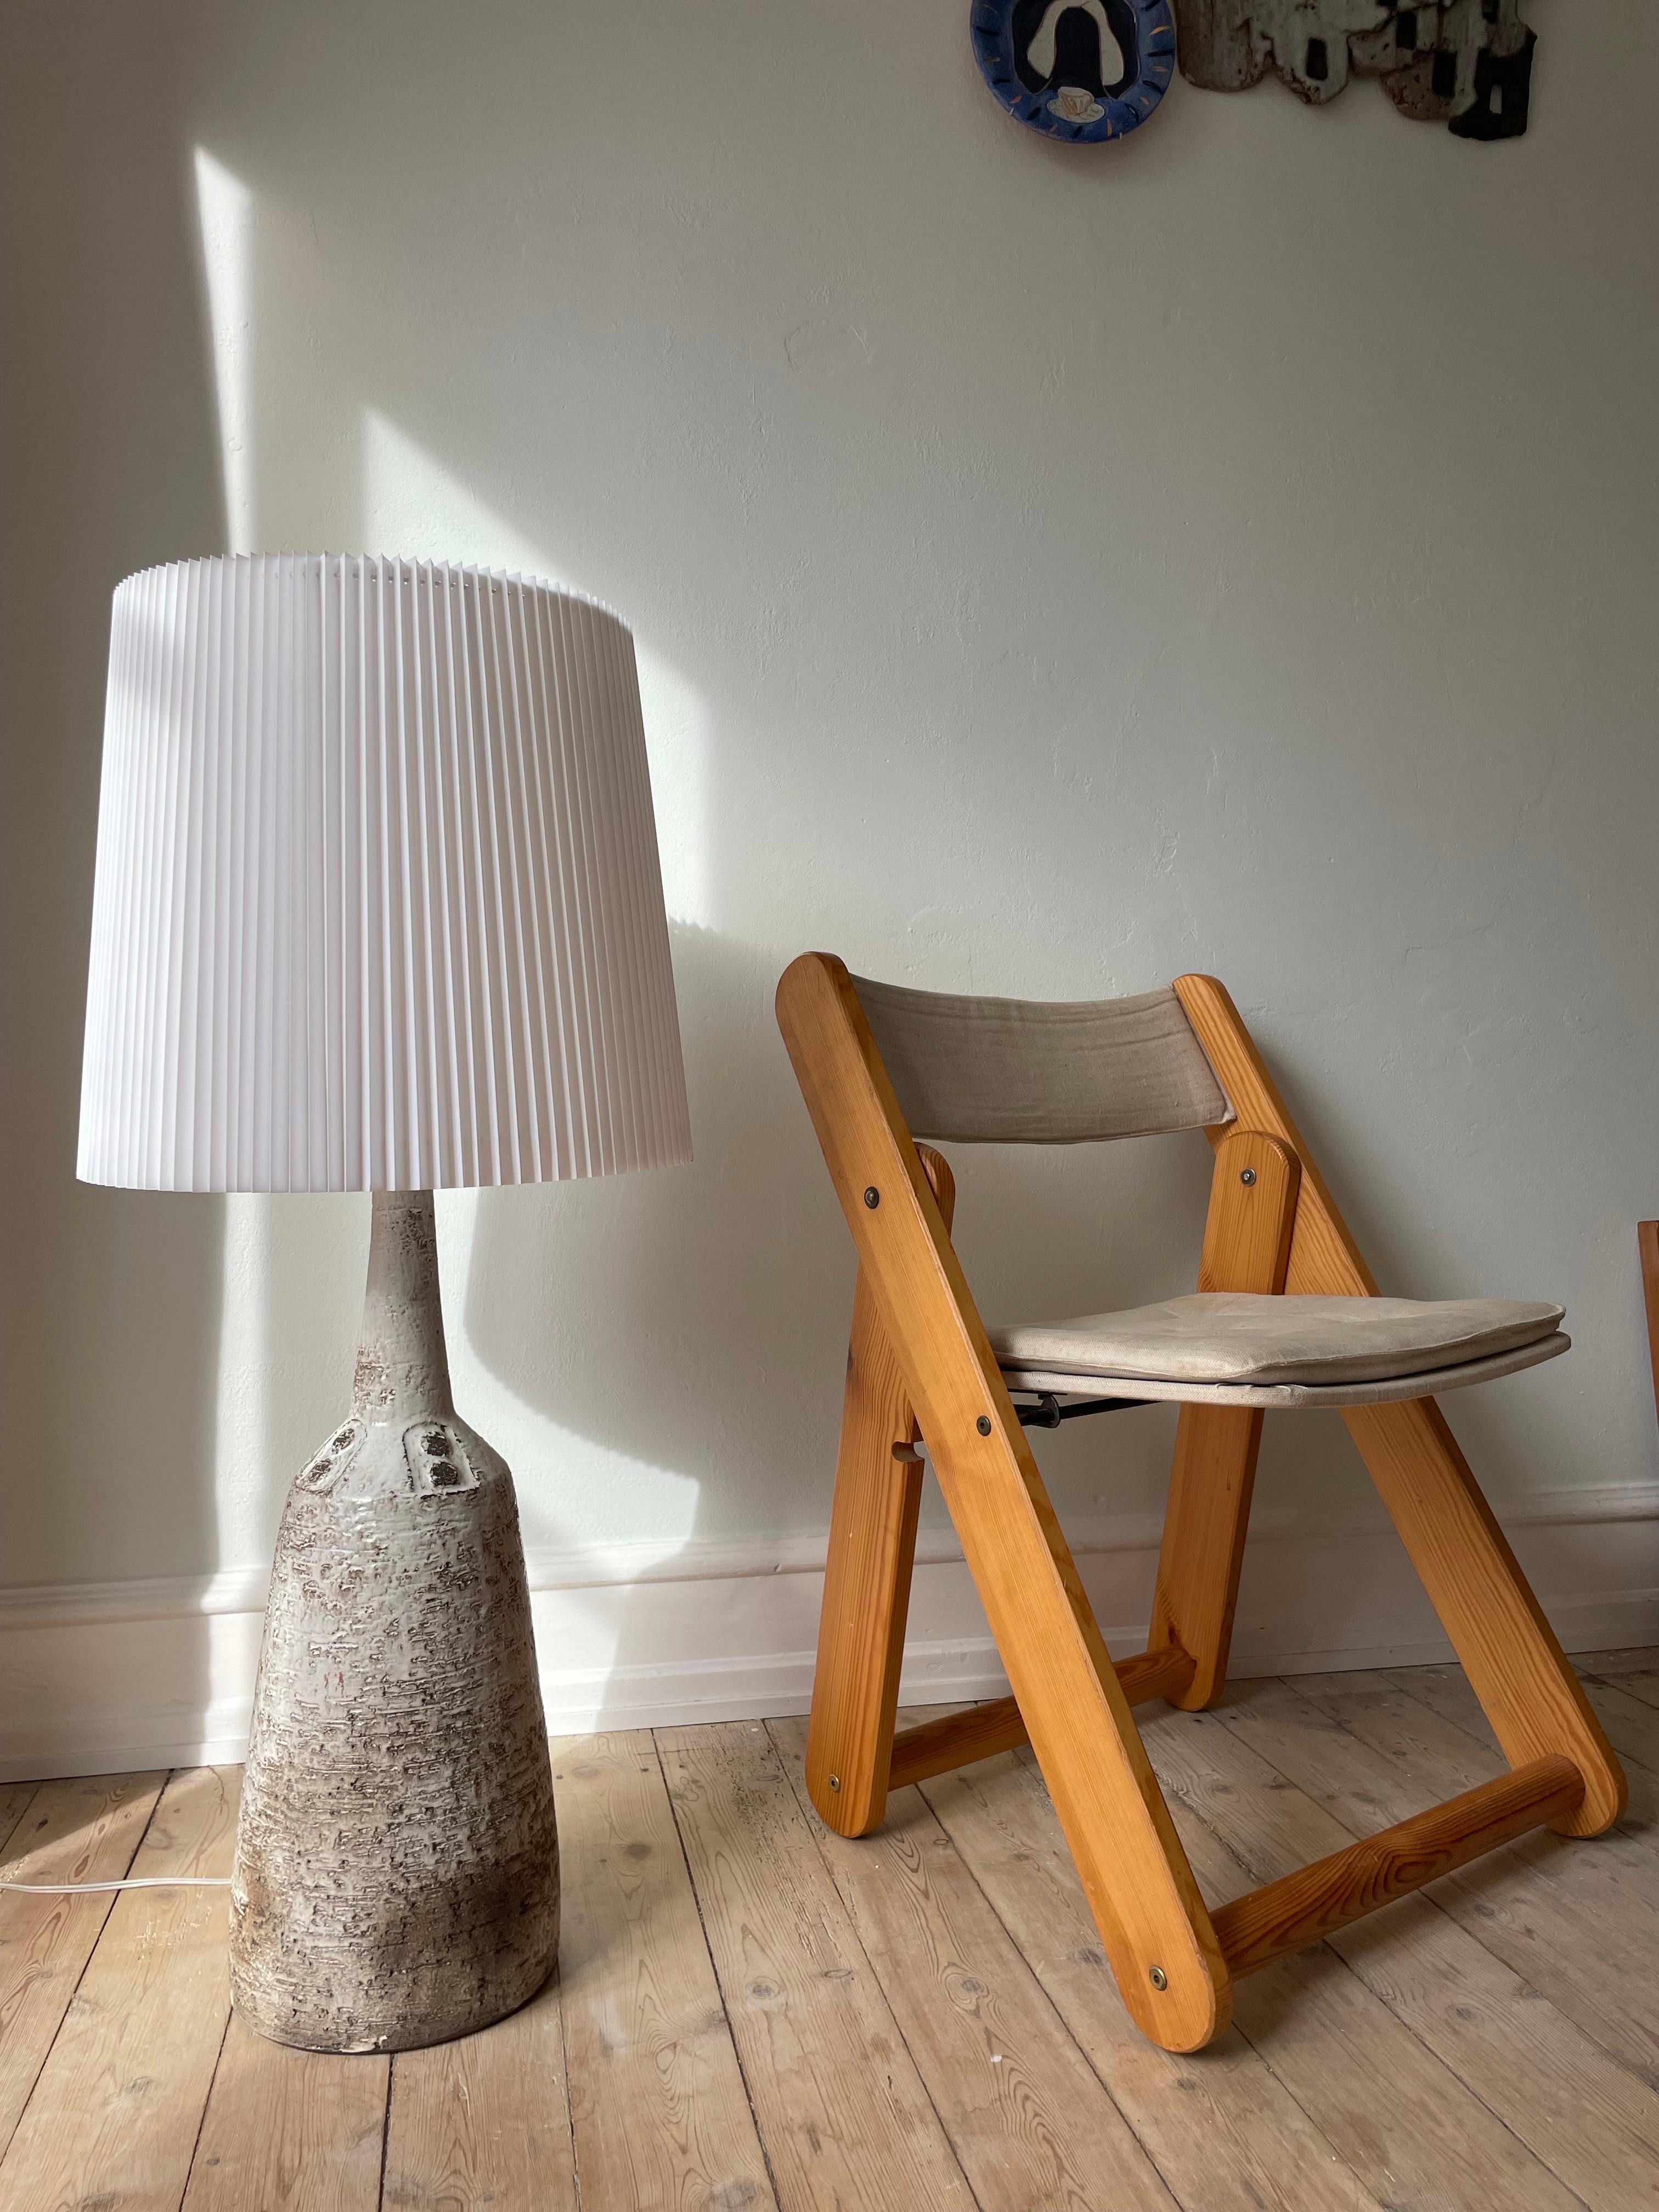 Tall, imposing brutalist Scandinavian modern handmade chamotte ceramic floor or table lamp. Organic color mix glaze in white, grey and cedar on the rustic wide base bottle shape with circular hand-carved graphic relief decor around the slender neck.